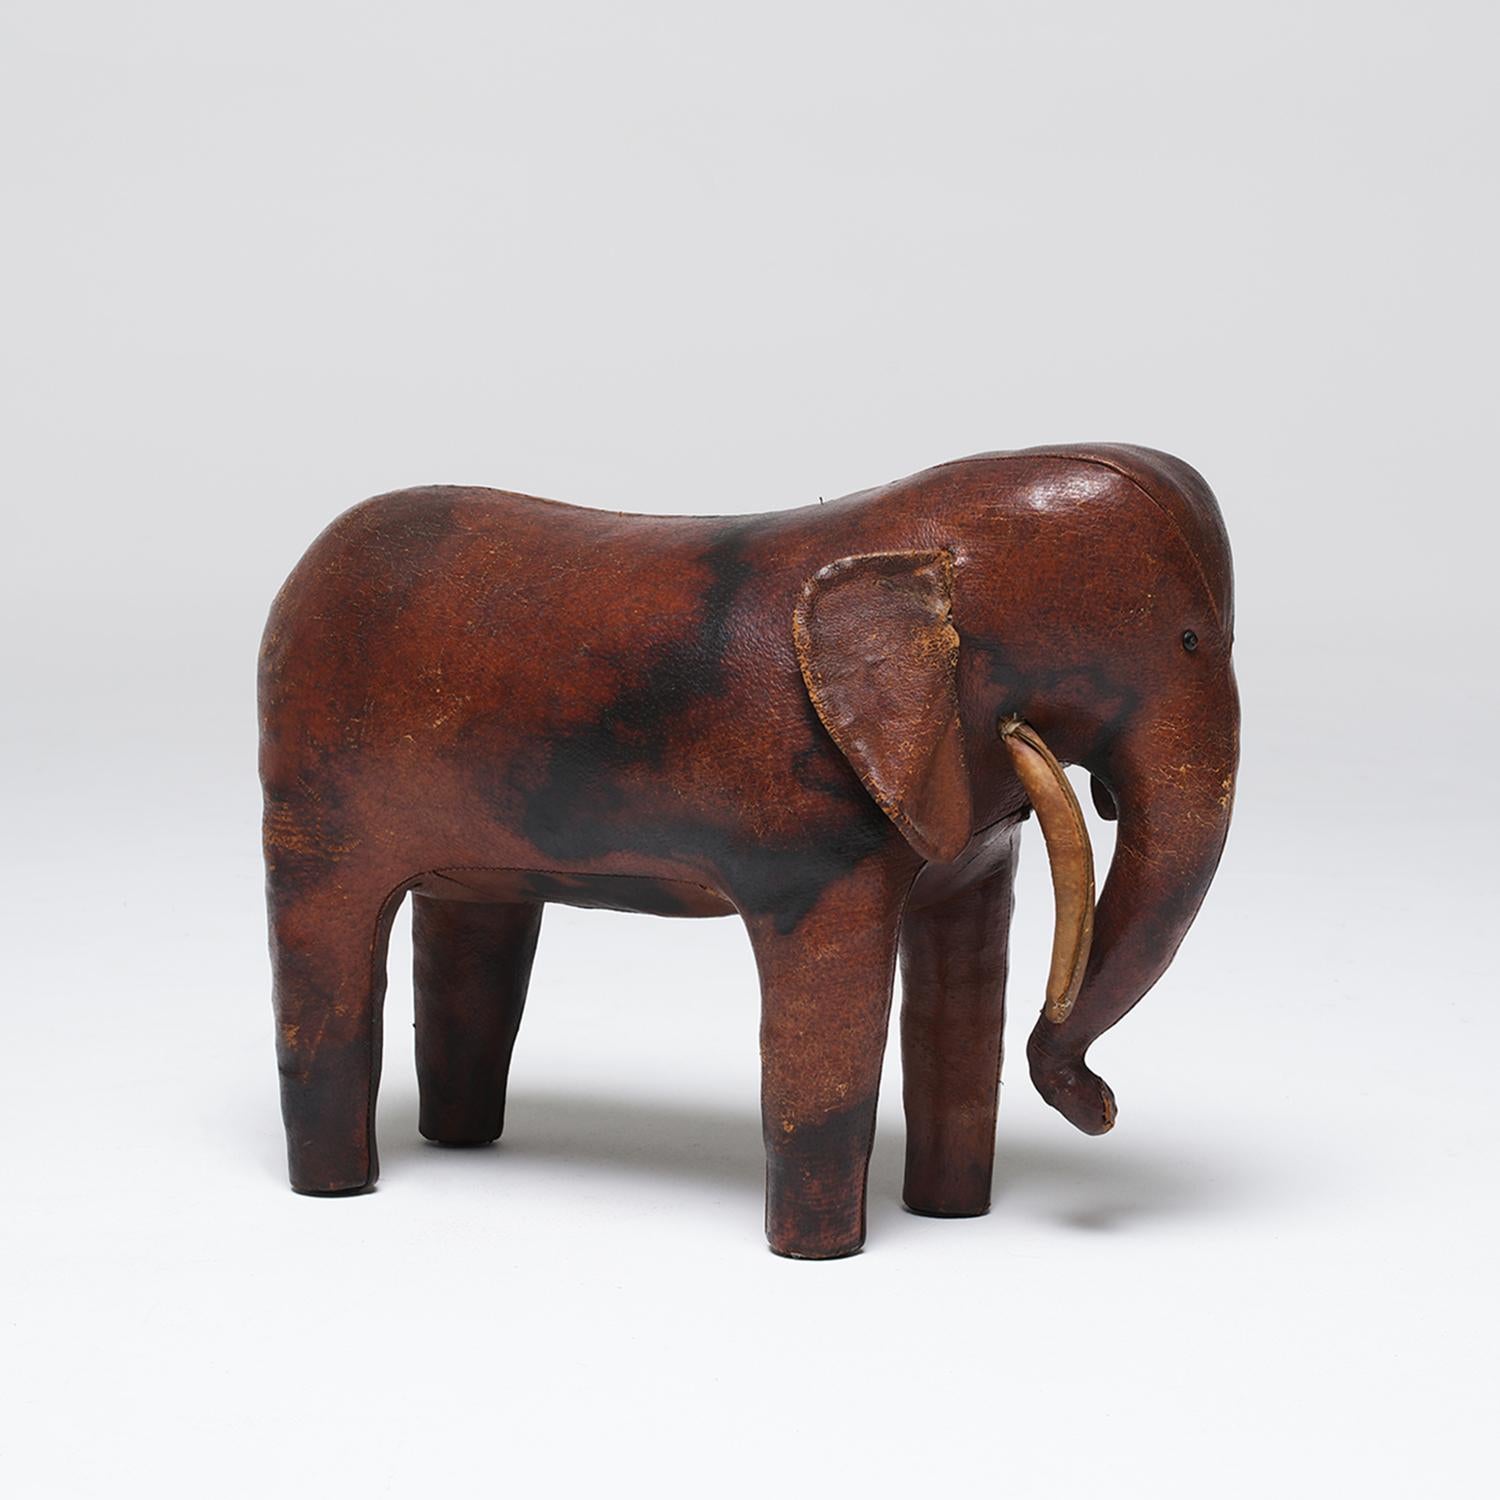 20th Century English Vintage Elephant Footstool by Dimitri Omersa For Sale 7